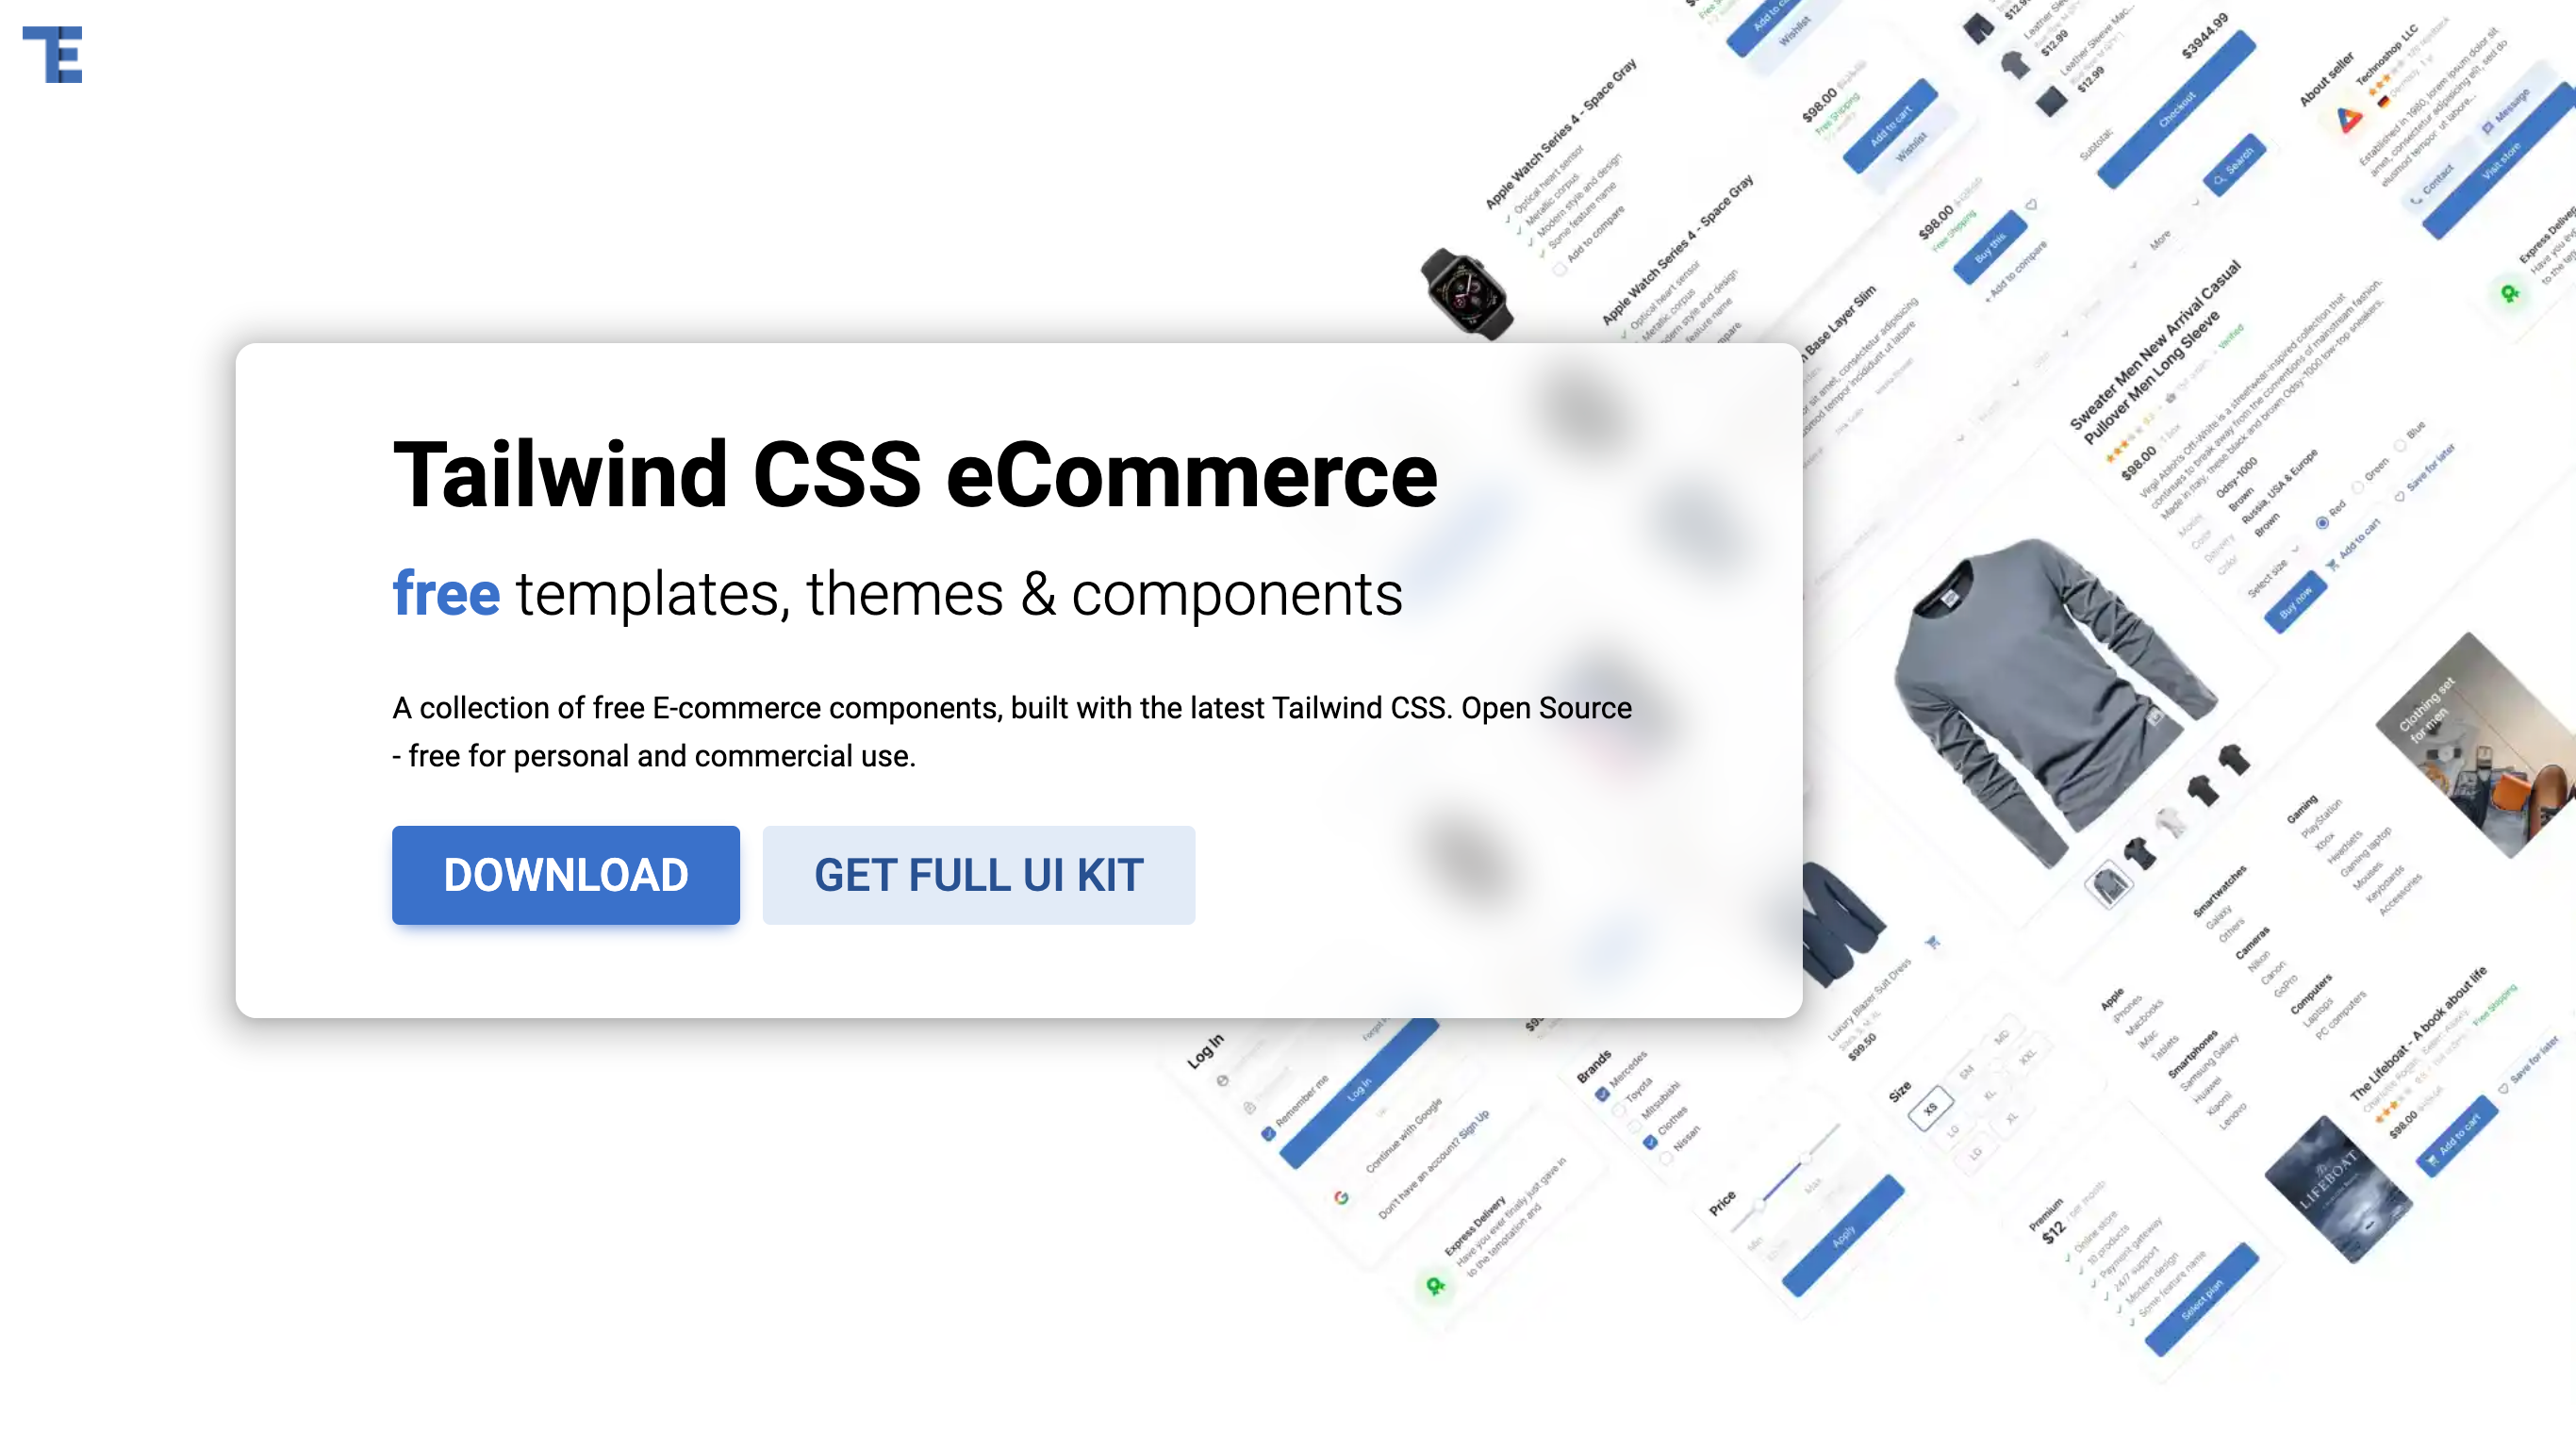 Tailwind CSS eCommerce Components 1 of 1 images